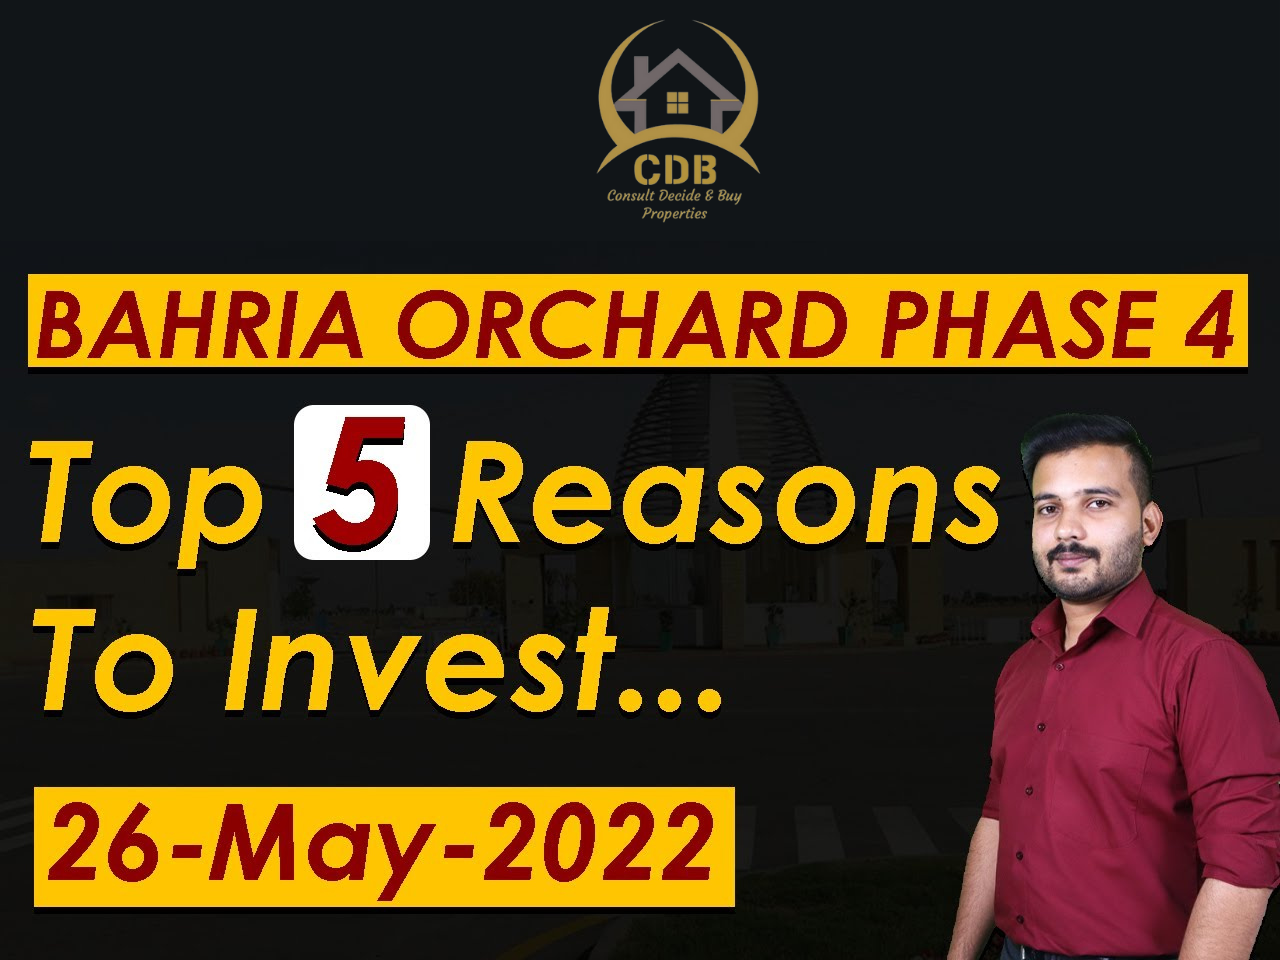 Reasons to invest in Bahria Orchard Phase 4